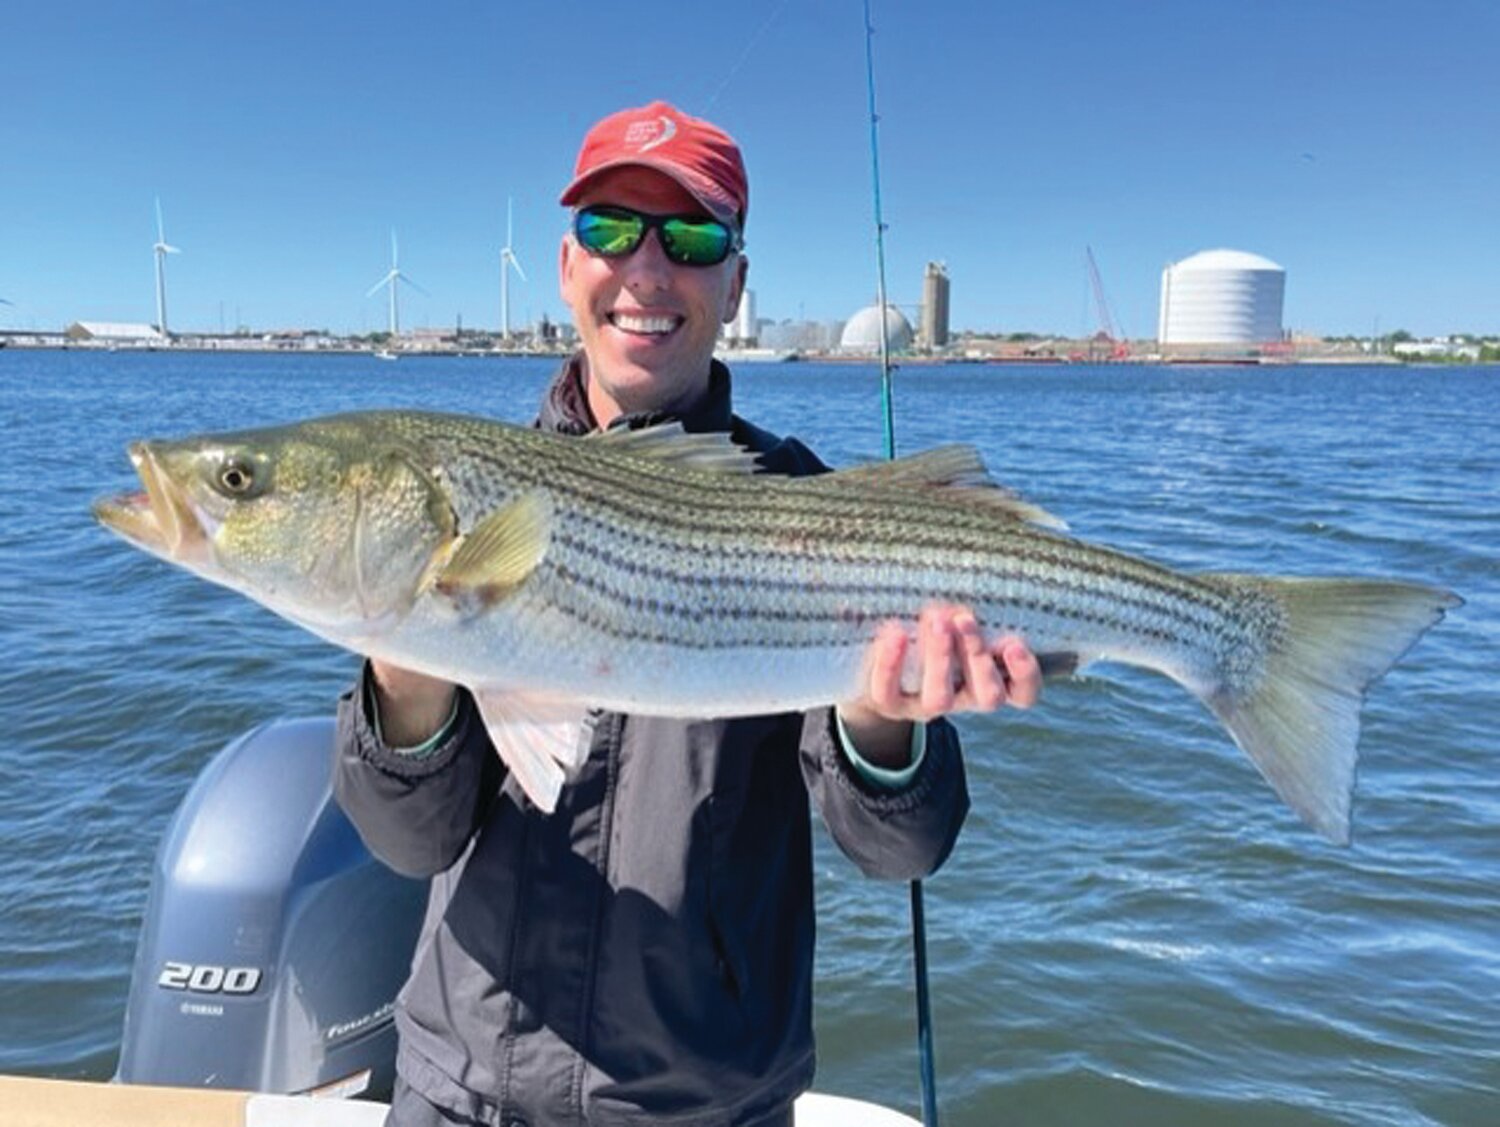 STRIPED BASS: Mark Tracy of Barrington caught striped bass to 29-inch this weekend in the East Passage from the shipping channel to Potters Cove, Prudence Island. (File photo)